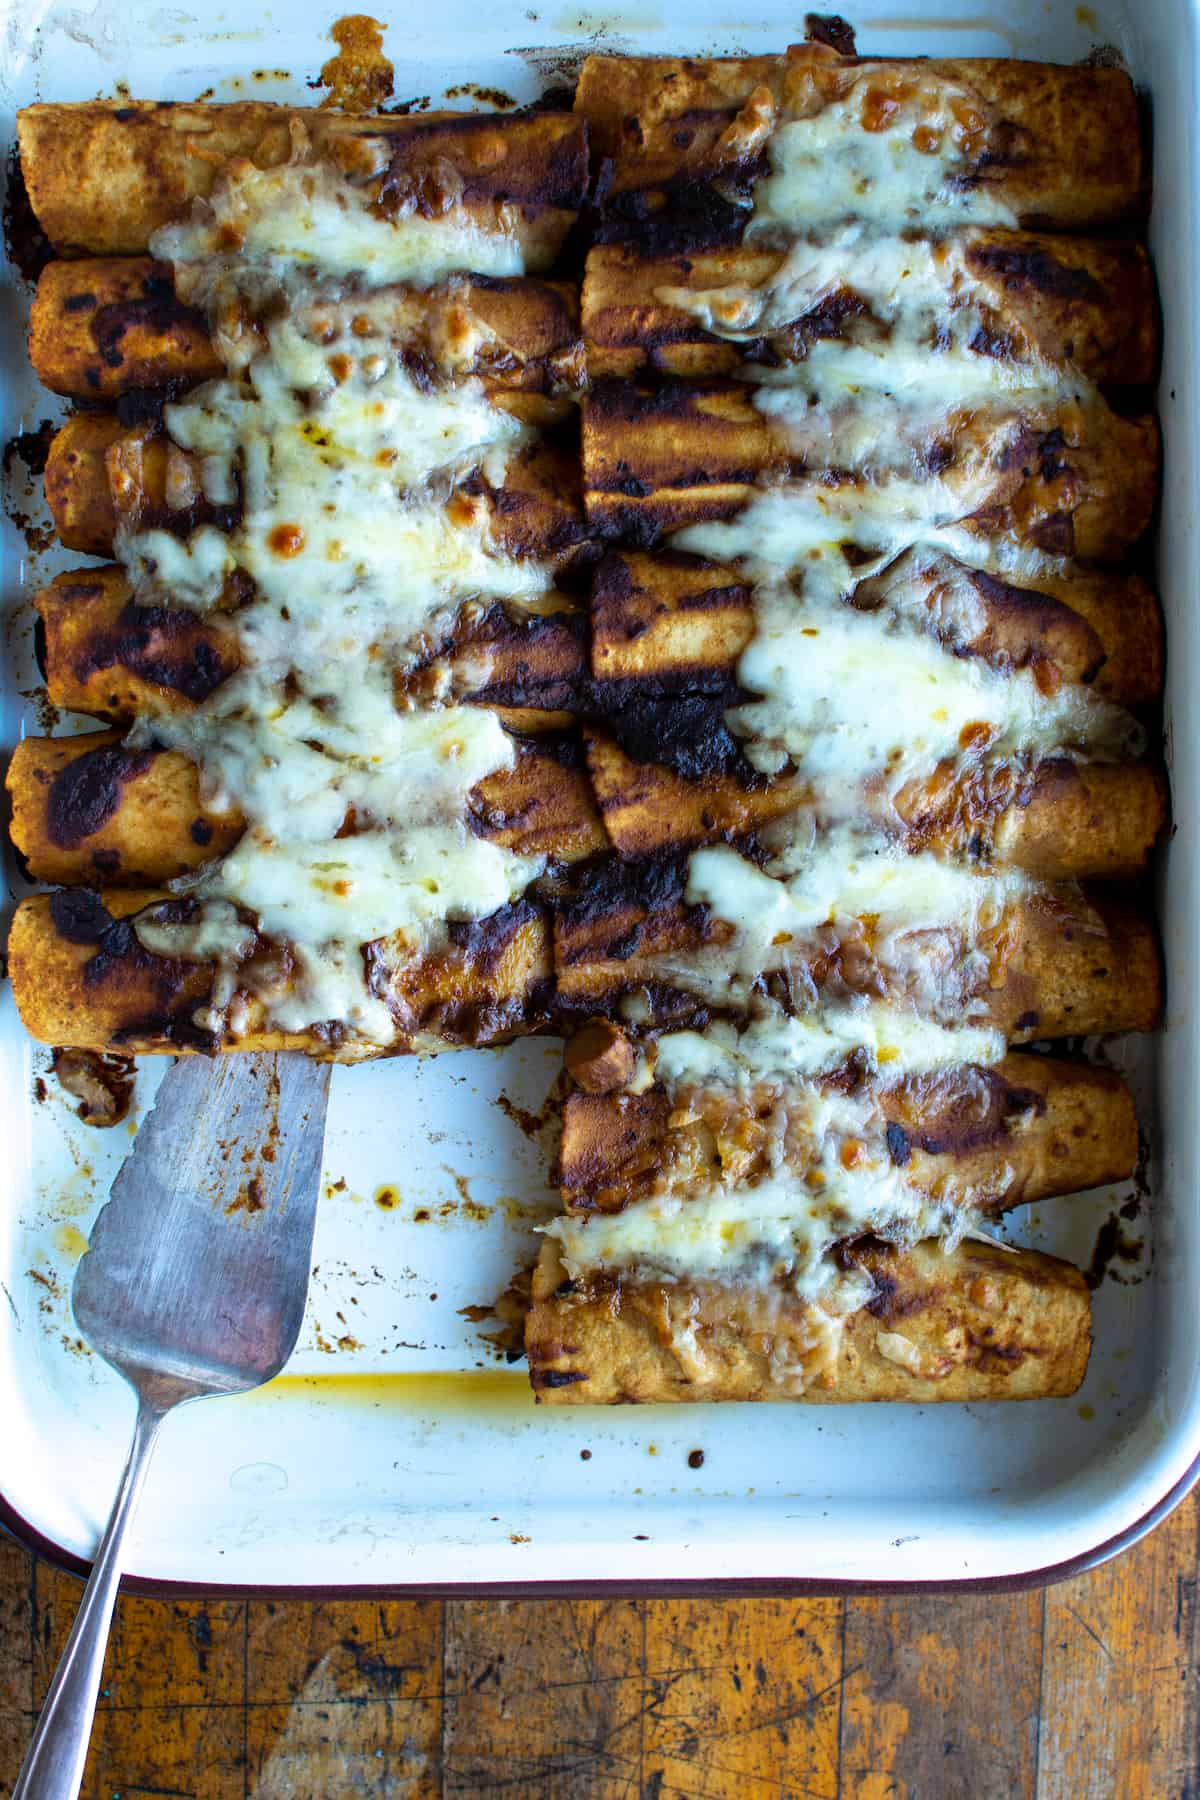 Vegetarian Enchiladas with sautéed shiitake mushrooms and a blend of creamy Oaxaca cheese and sharp Gruyere. Top with guacamole and Mexican crema for an easy, healthy Cinco de Mayo recipe! This year celebrate en su casa with the most perfect vegetarian enchilada recipe. #ad #vegetarianenchiladas #enchiladas #enchiladarecipe #latortillafactory